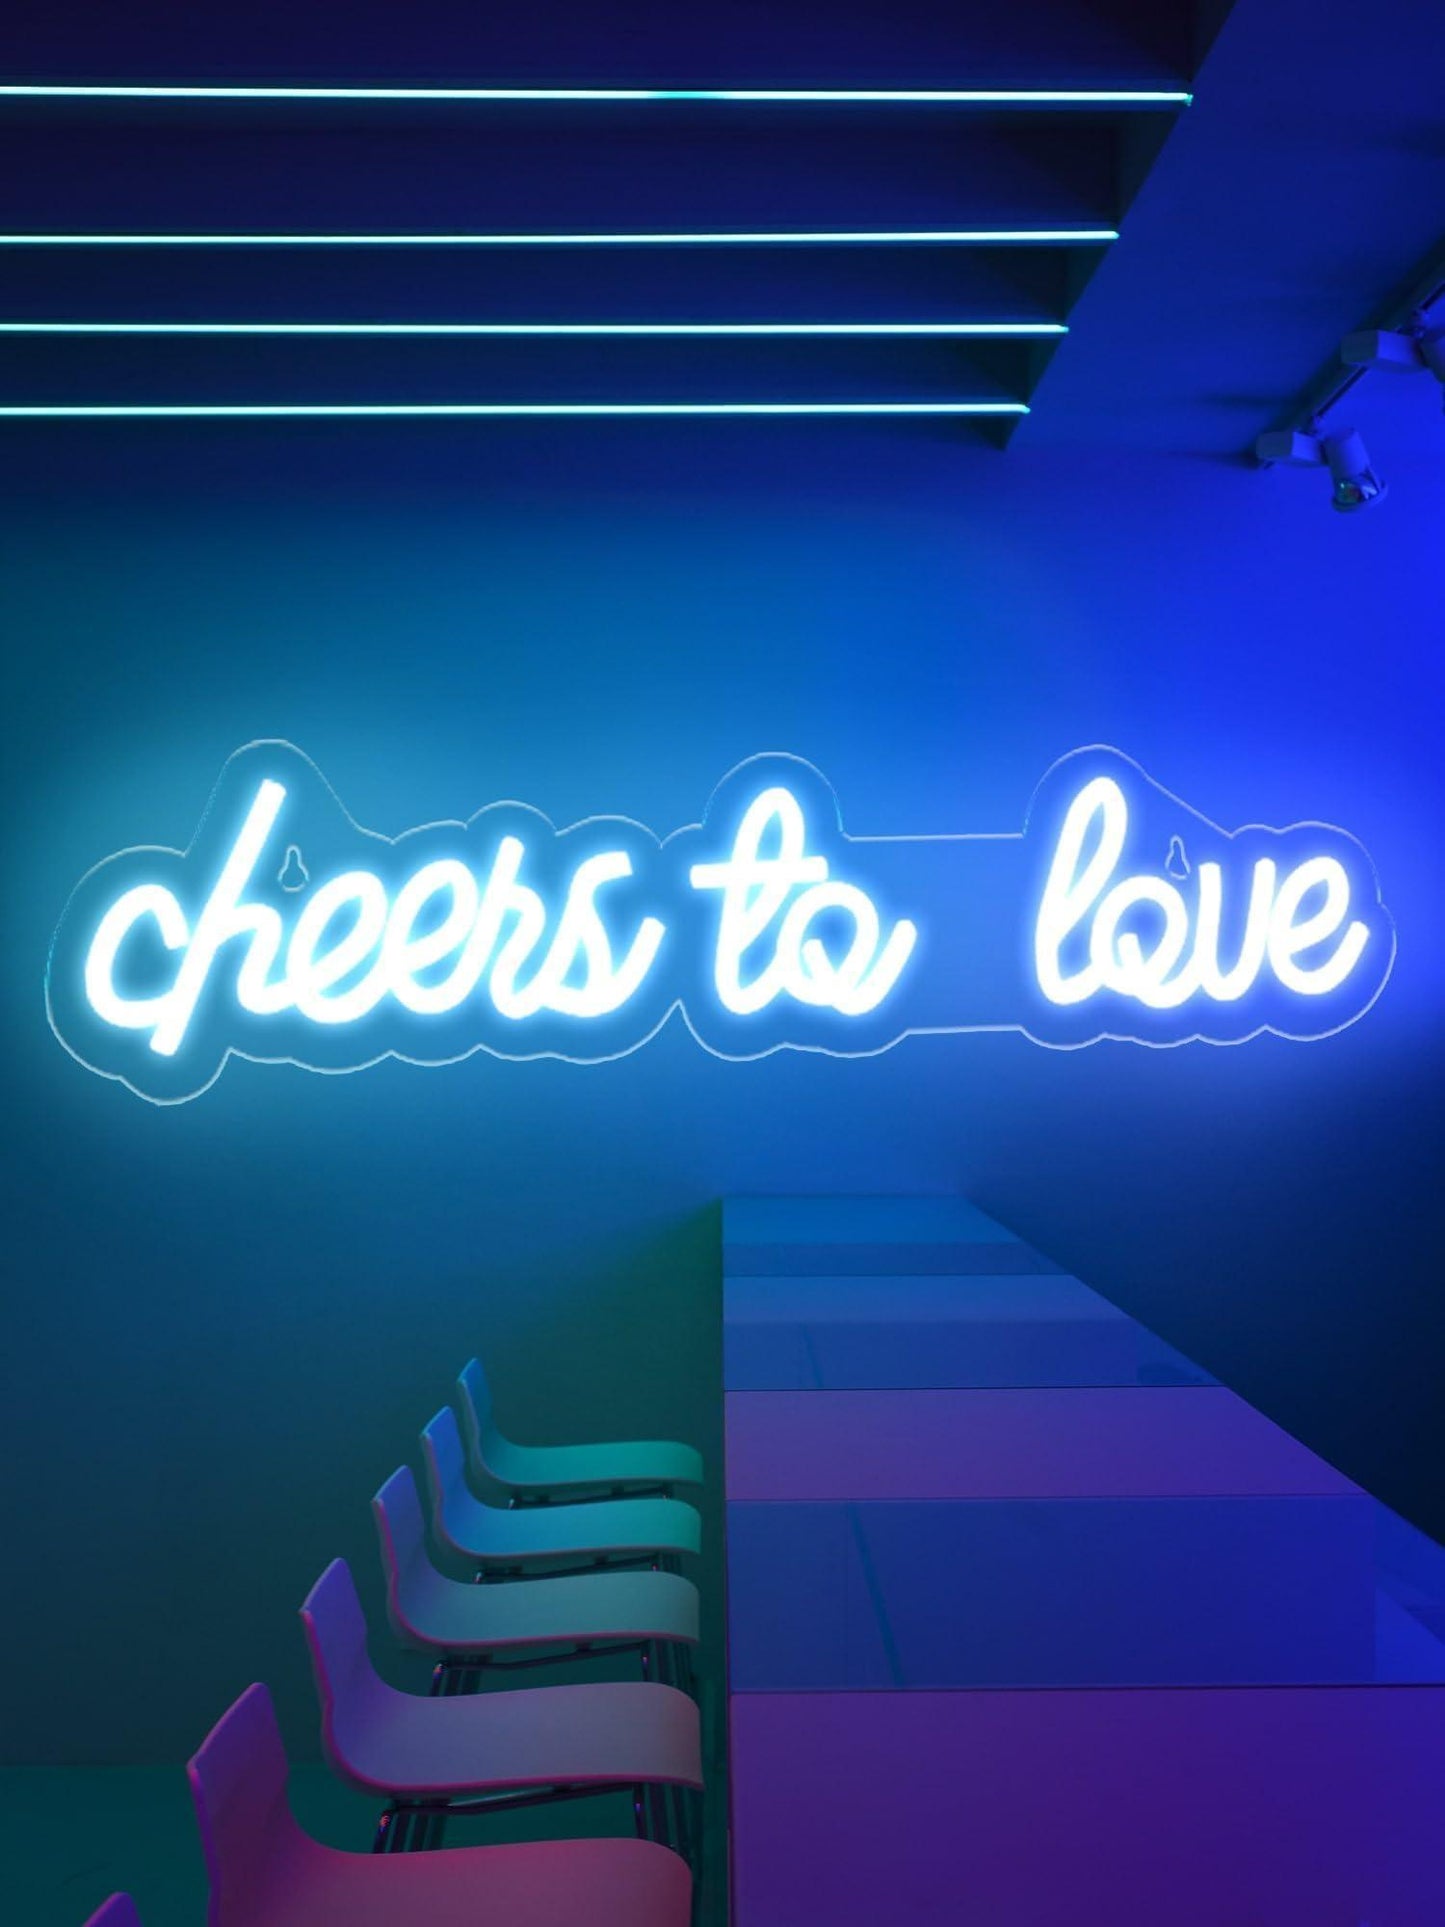 Cheers To Love Neon Sign Neon Lights 17.7 x 3.9 in Neon Signs For Wall Decor USB Powered Led Signs For Bedroom Wall LED Neon Signs Neon Lights For Bedroom Valentines Day Decor - Loomini